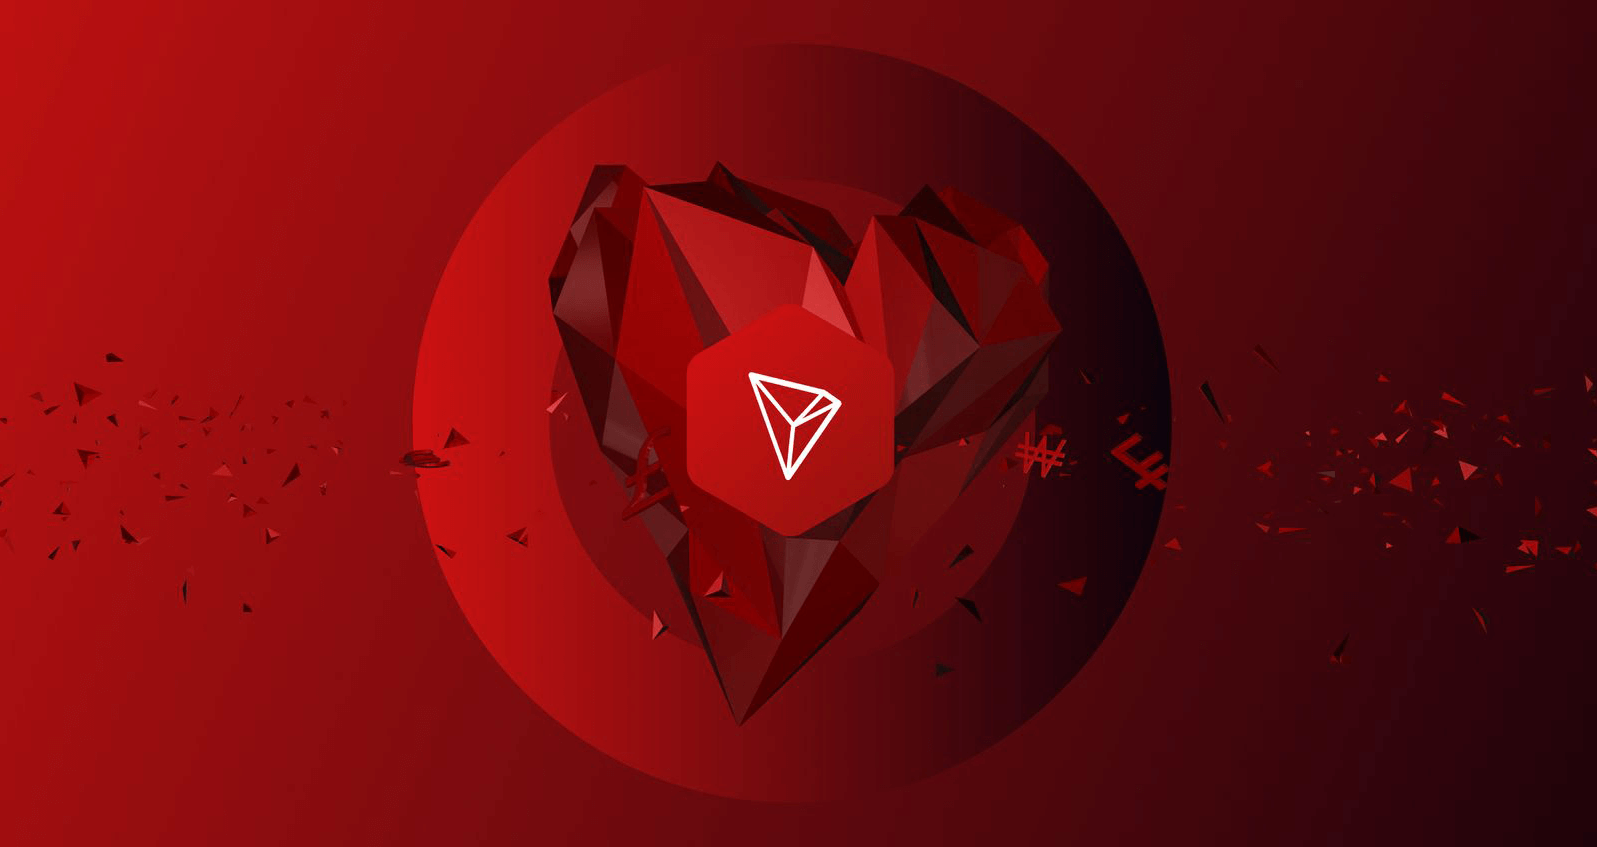 Tron (TRX) is an example of a cryptocurrency that started out as an ERC20 token before moving to its own blockchain.